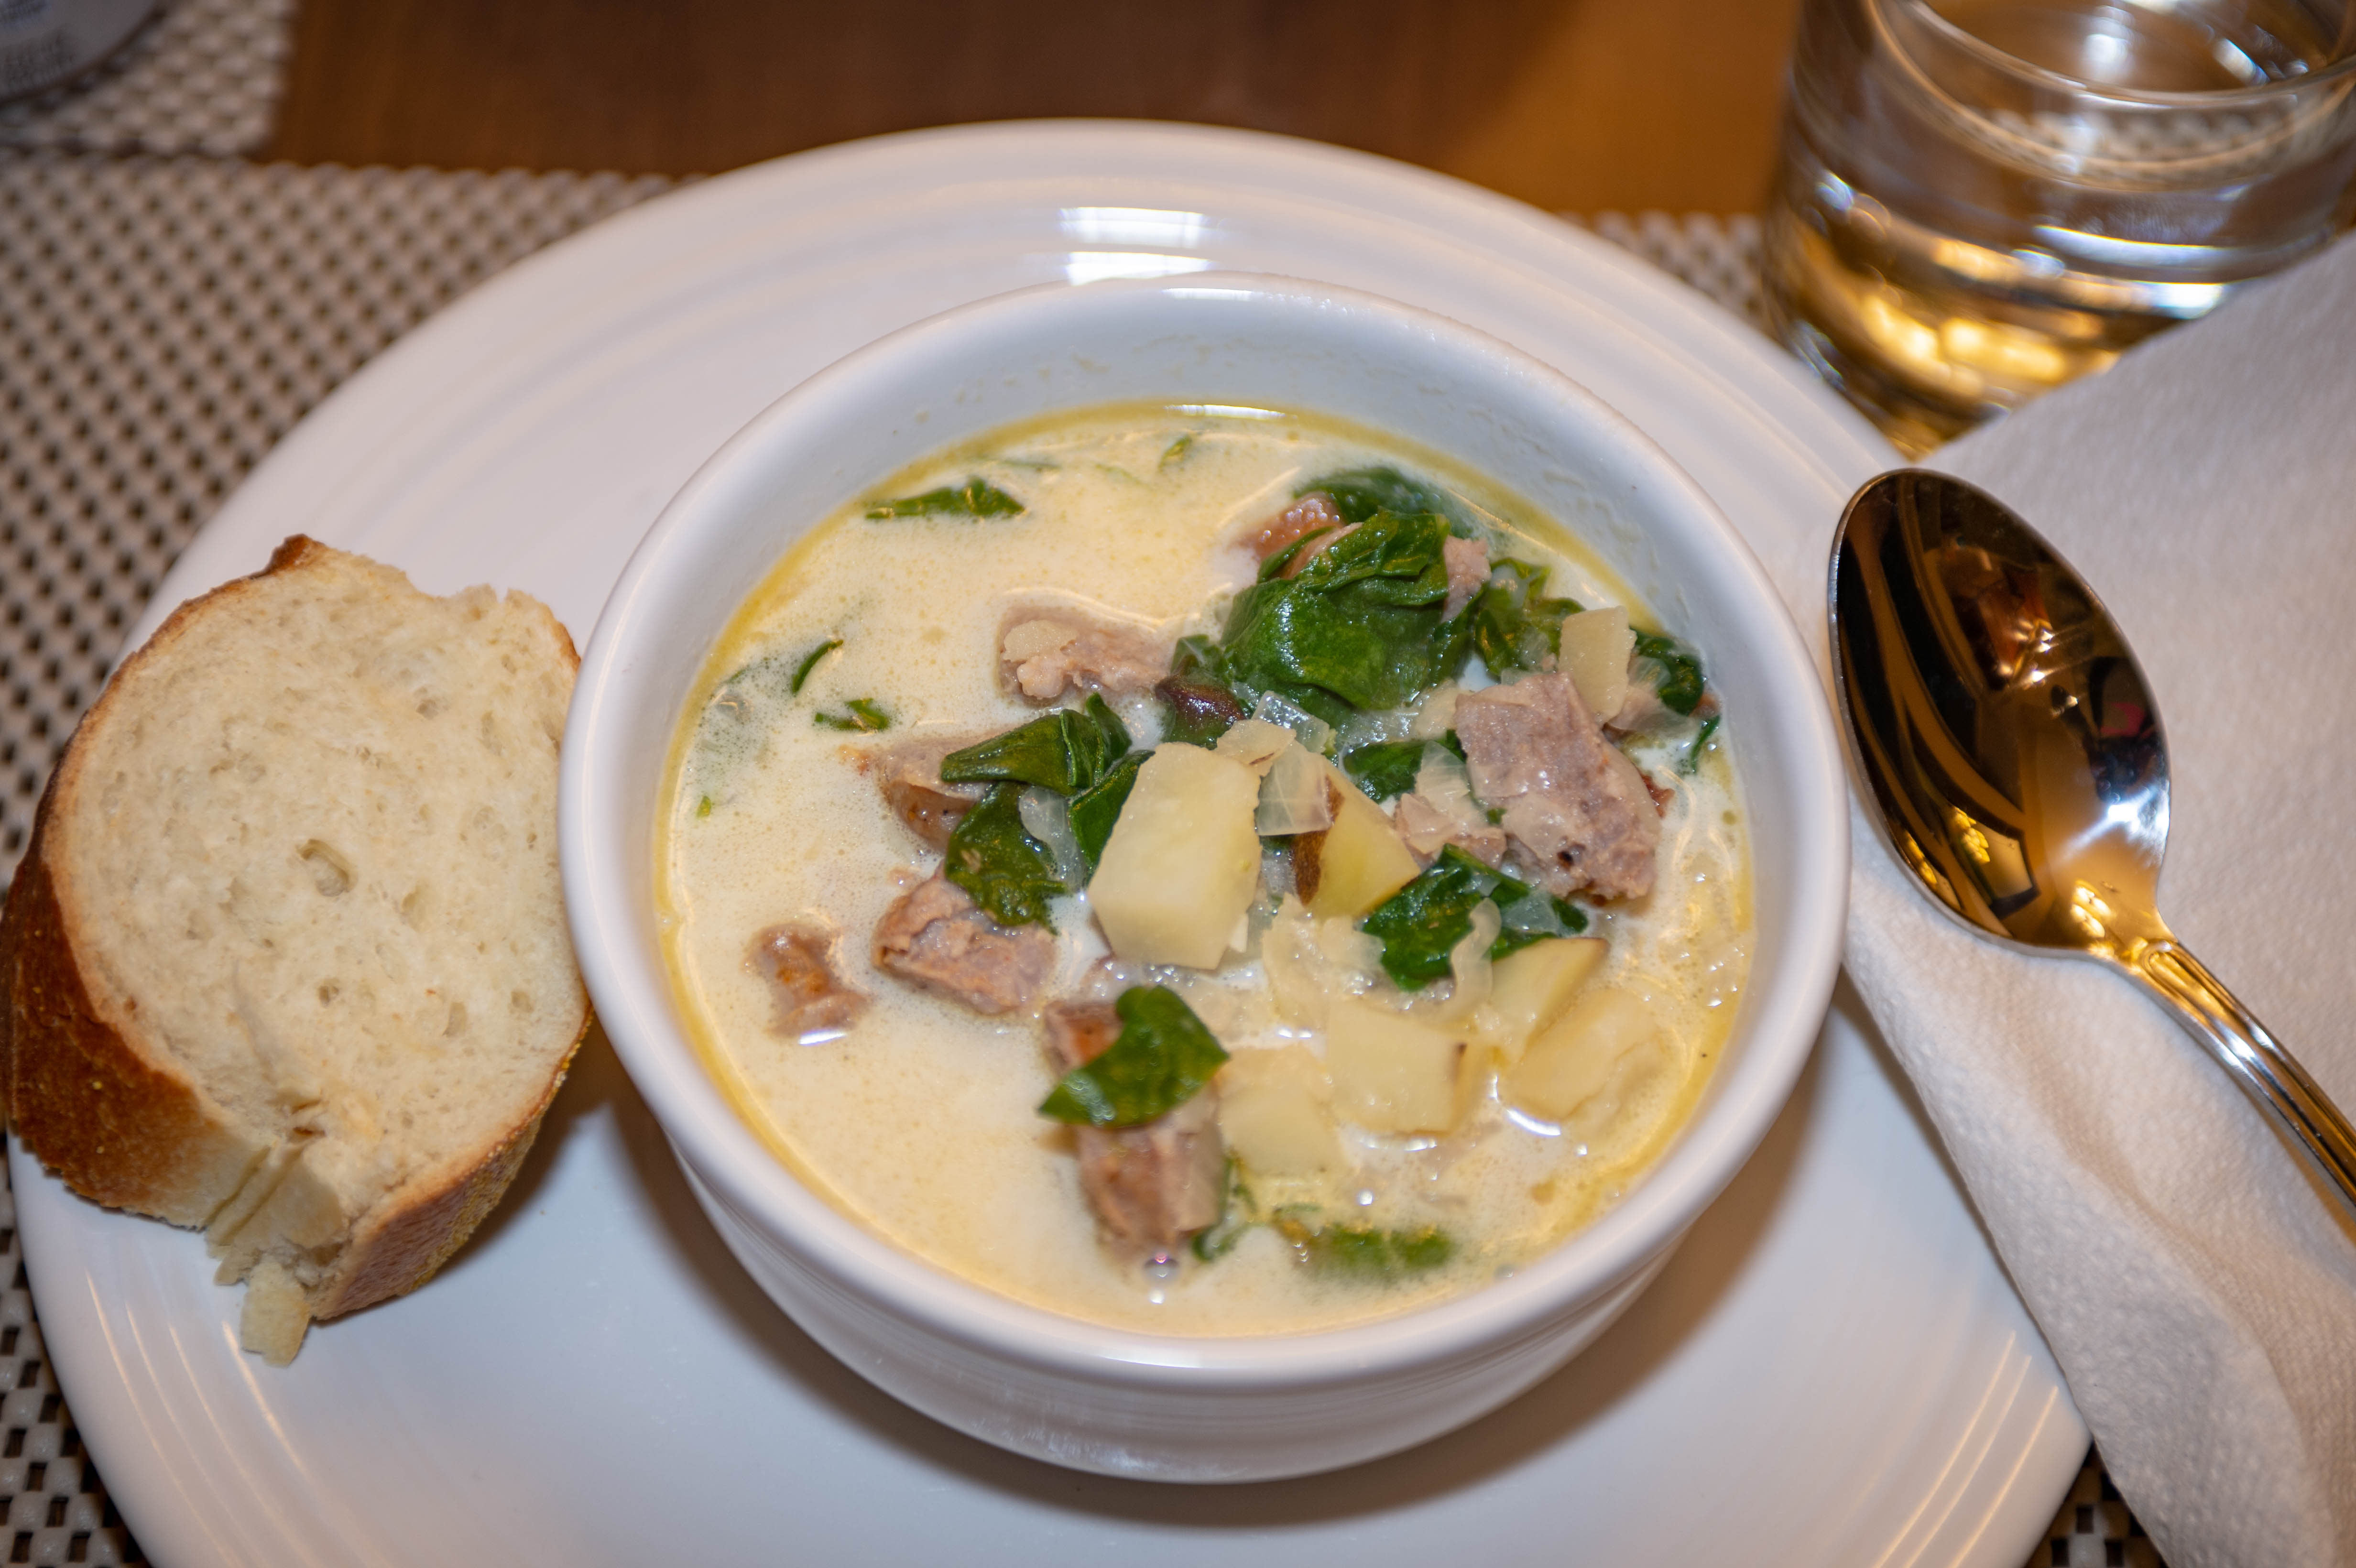 Rich Italian Sausage And Potato Soup Recipe Allrecipes,How Often Do Puppies Poop At 4 Weeks